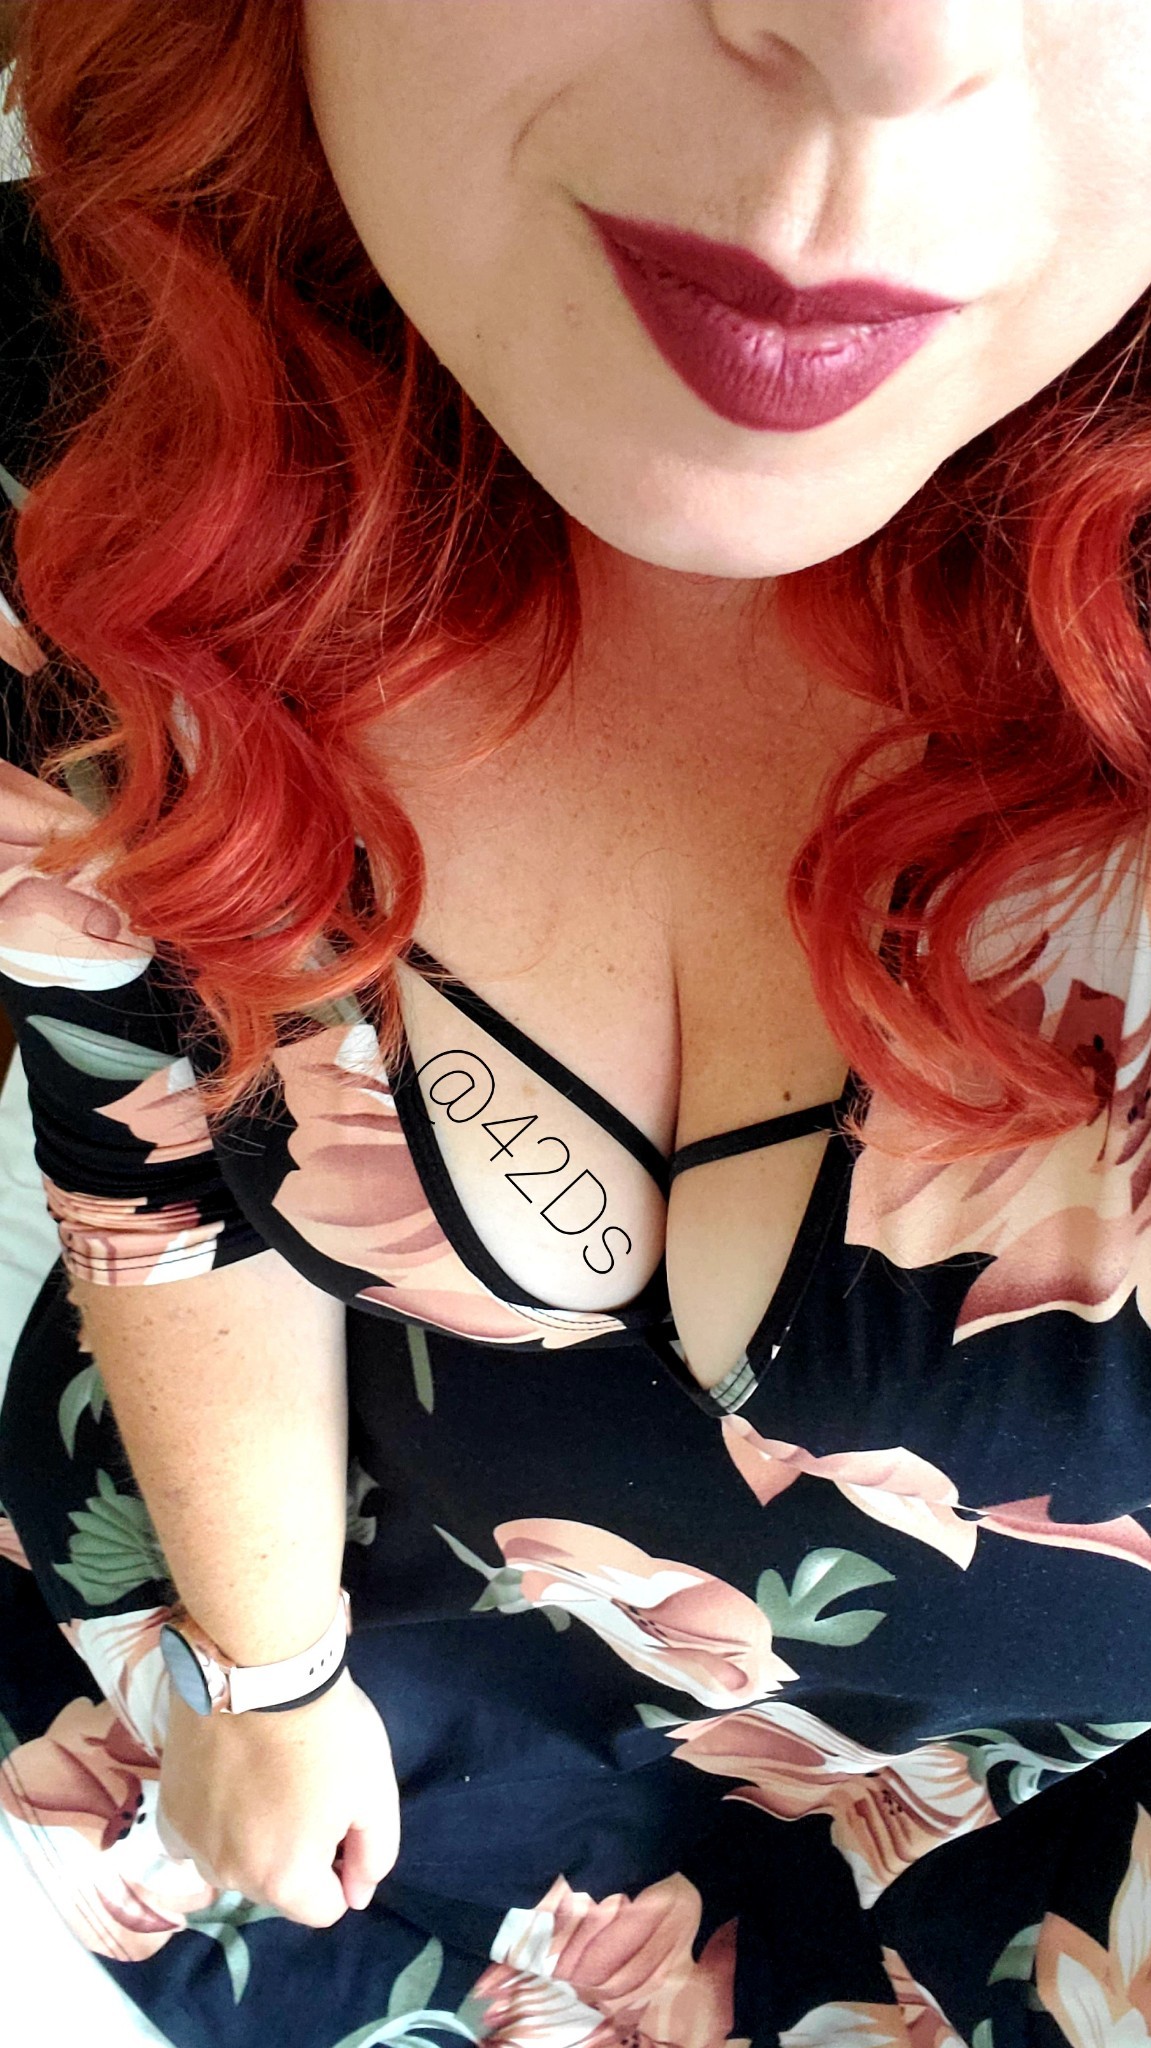 42ds:brody-dangeldorpher:Am I too late to share some fancy Friday freckles? 😏😘 @42ds The Dangeldorpher’s inbox is always open for FRECKLES @42ds thank you for dropping by, love 😈💋🔥FFF. FINALLY. FUCKING. FRIDAY. Oh, and freckles. 